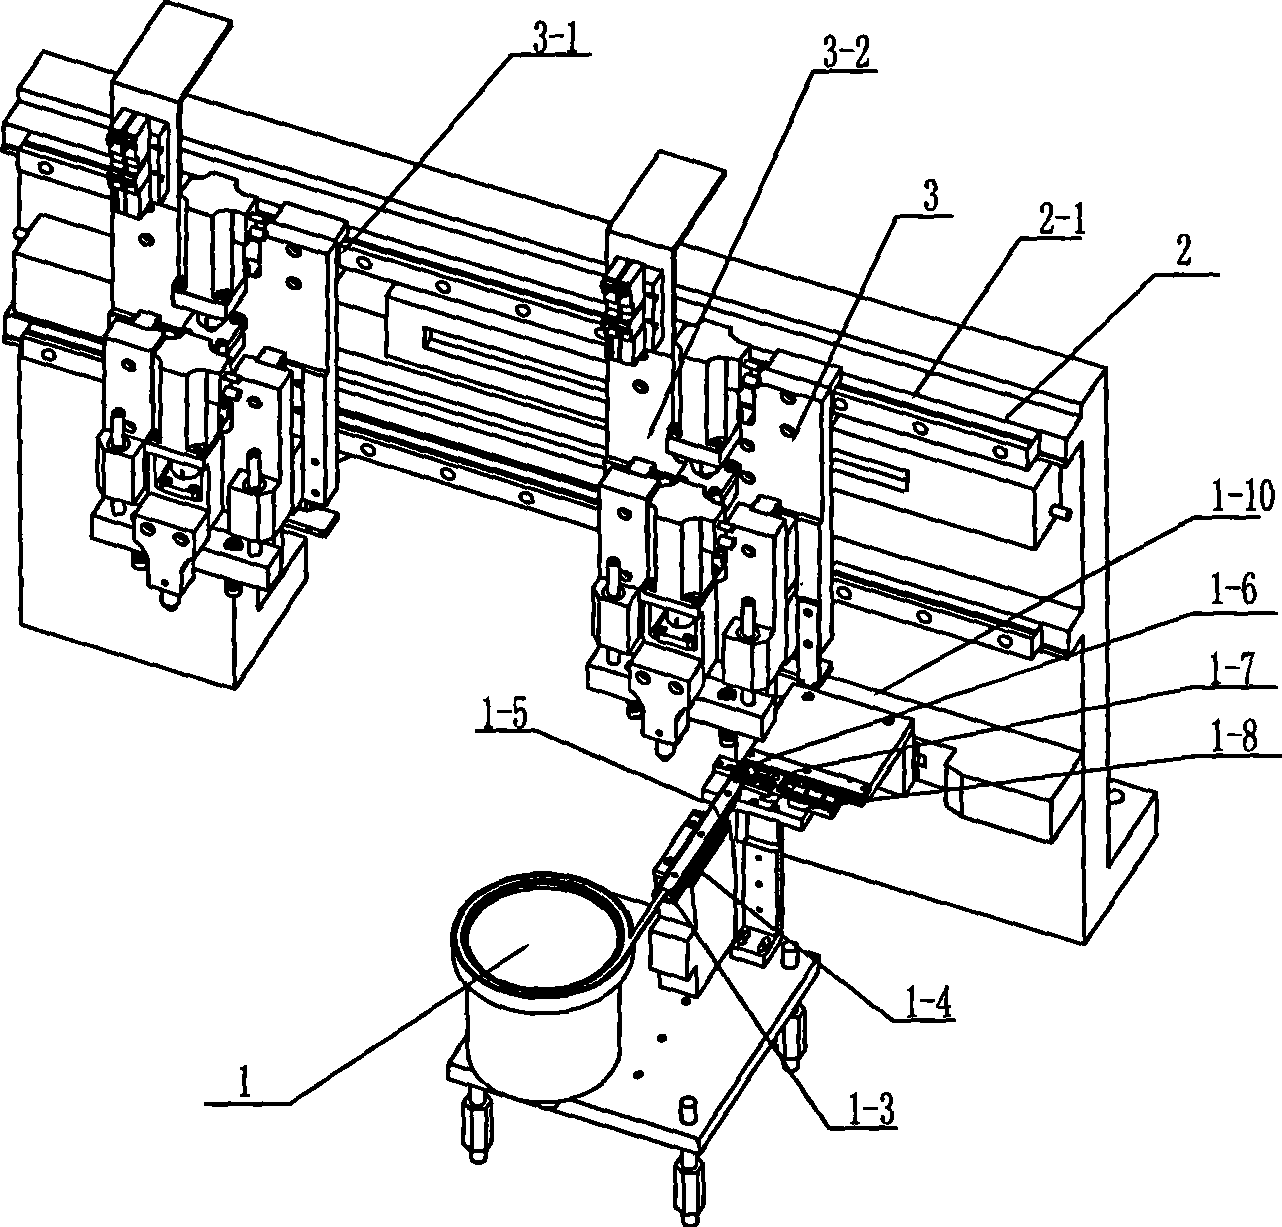 Biax full-automatic coiling machine